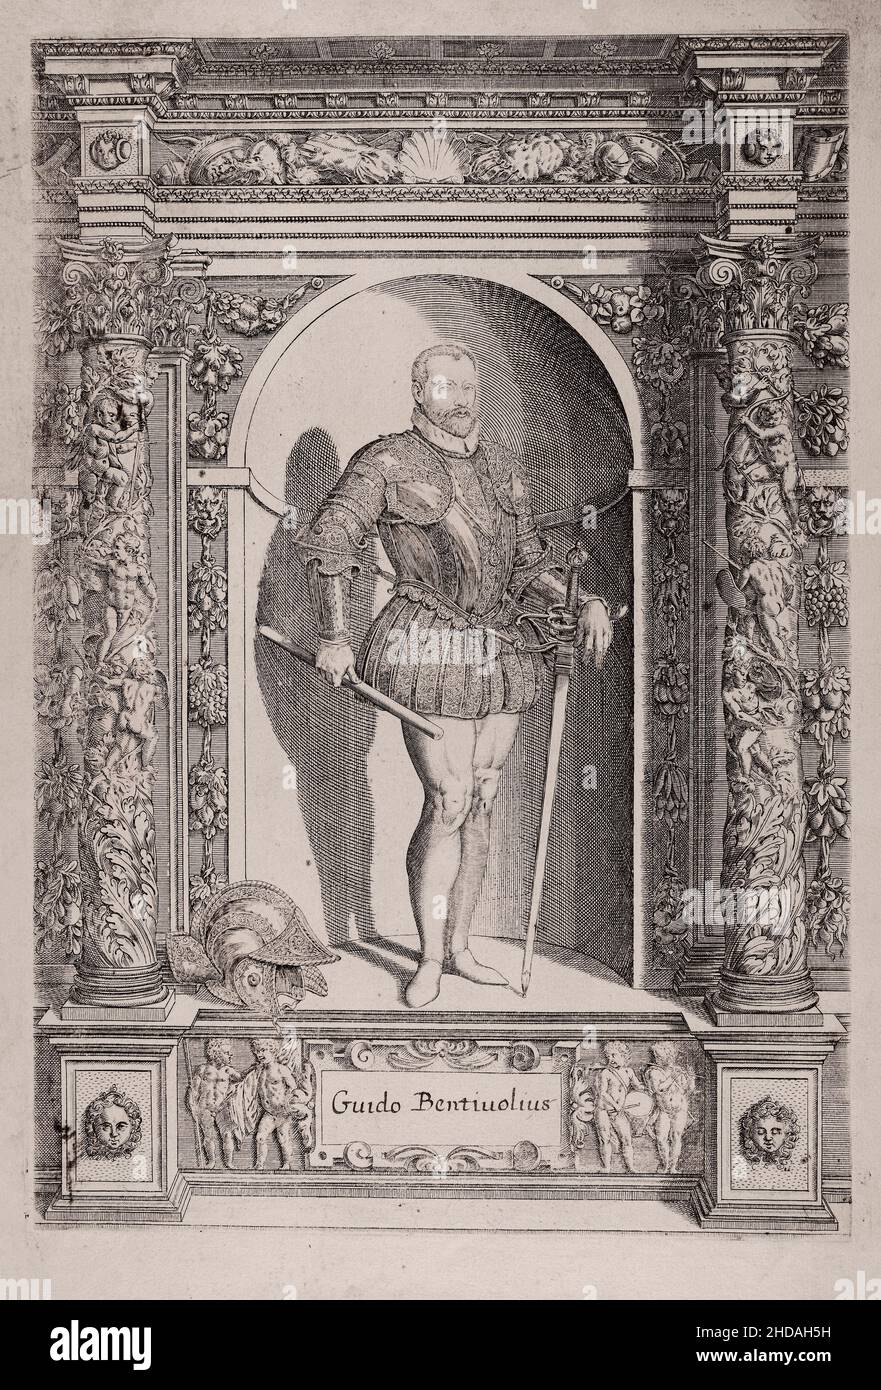 Engraving portrait of Guido Bentiuolius. 1601 This engraving from the book of the arms collection Archduke Ferdinand, it was first published in Innsbr Stock Photo